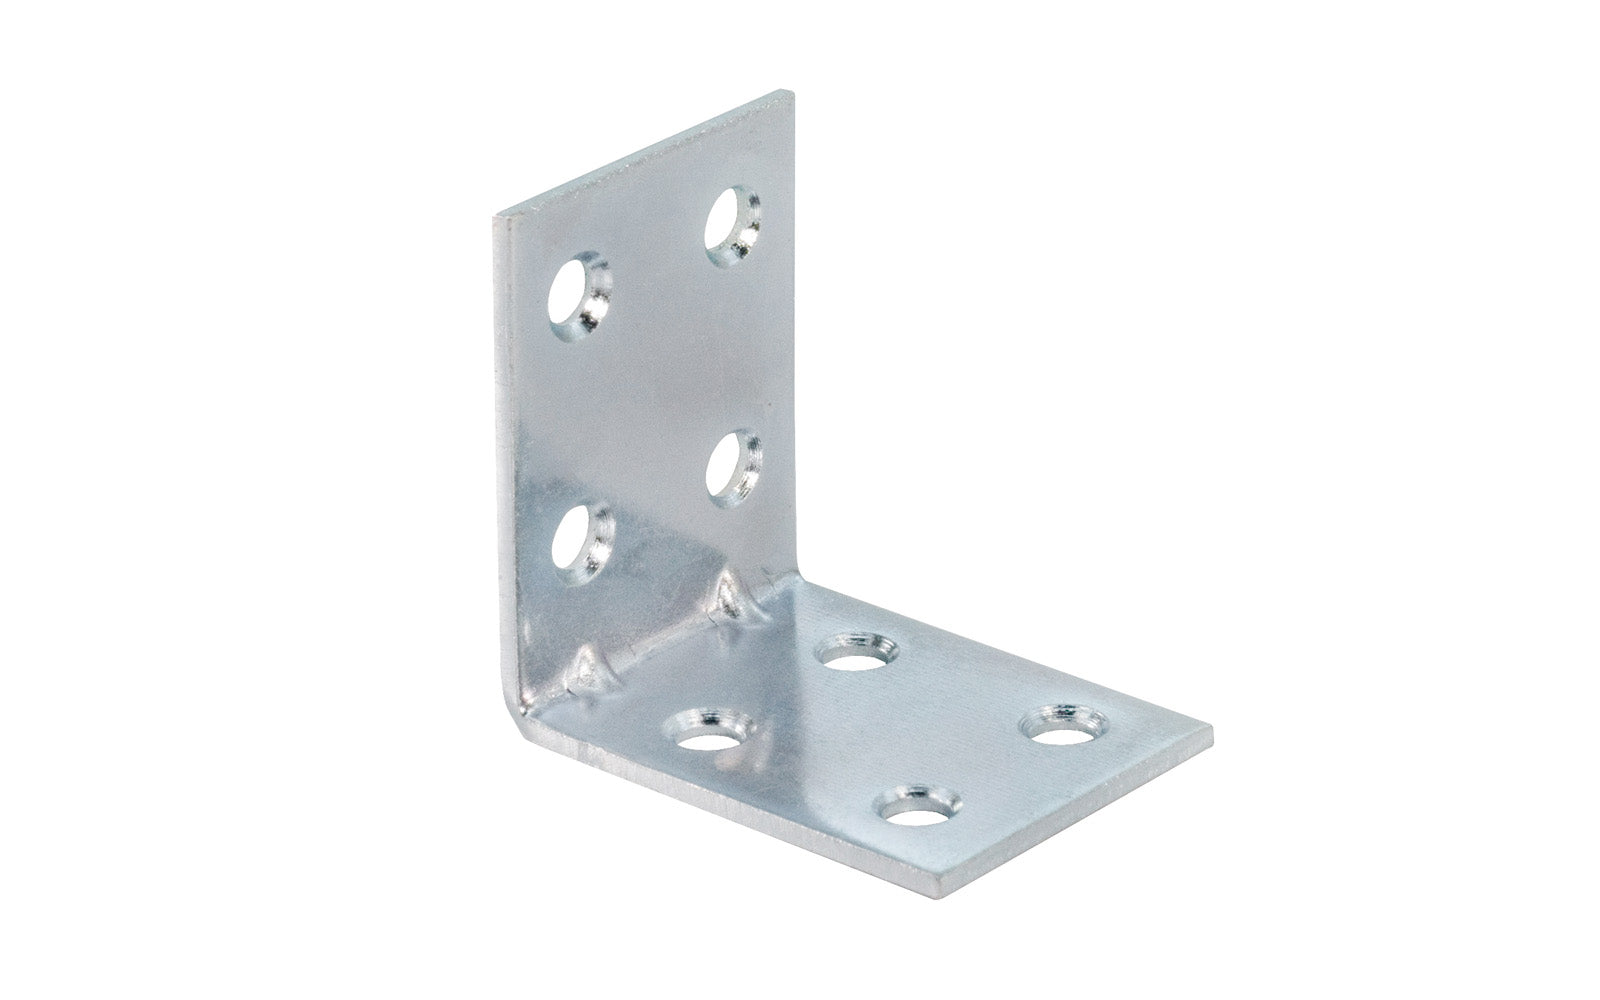 These double width corner braces are designed for furniture, cabinets, shelving support, etc. Allows for quick & easy repair of items in the workshop, home, & other applications. Made of steel material with a zinc plated finish. Available in  1-1/2